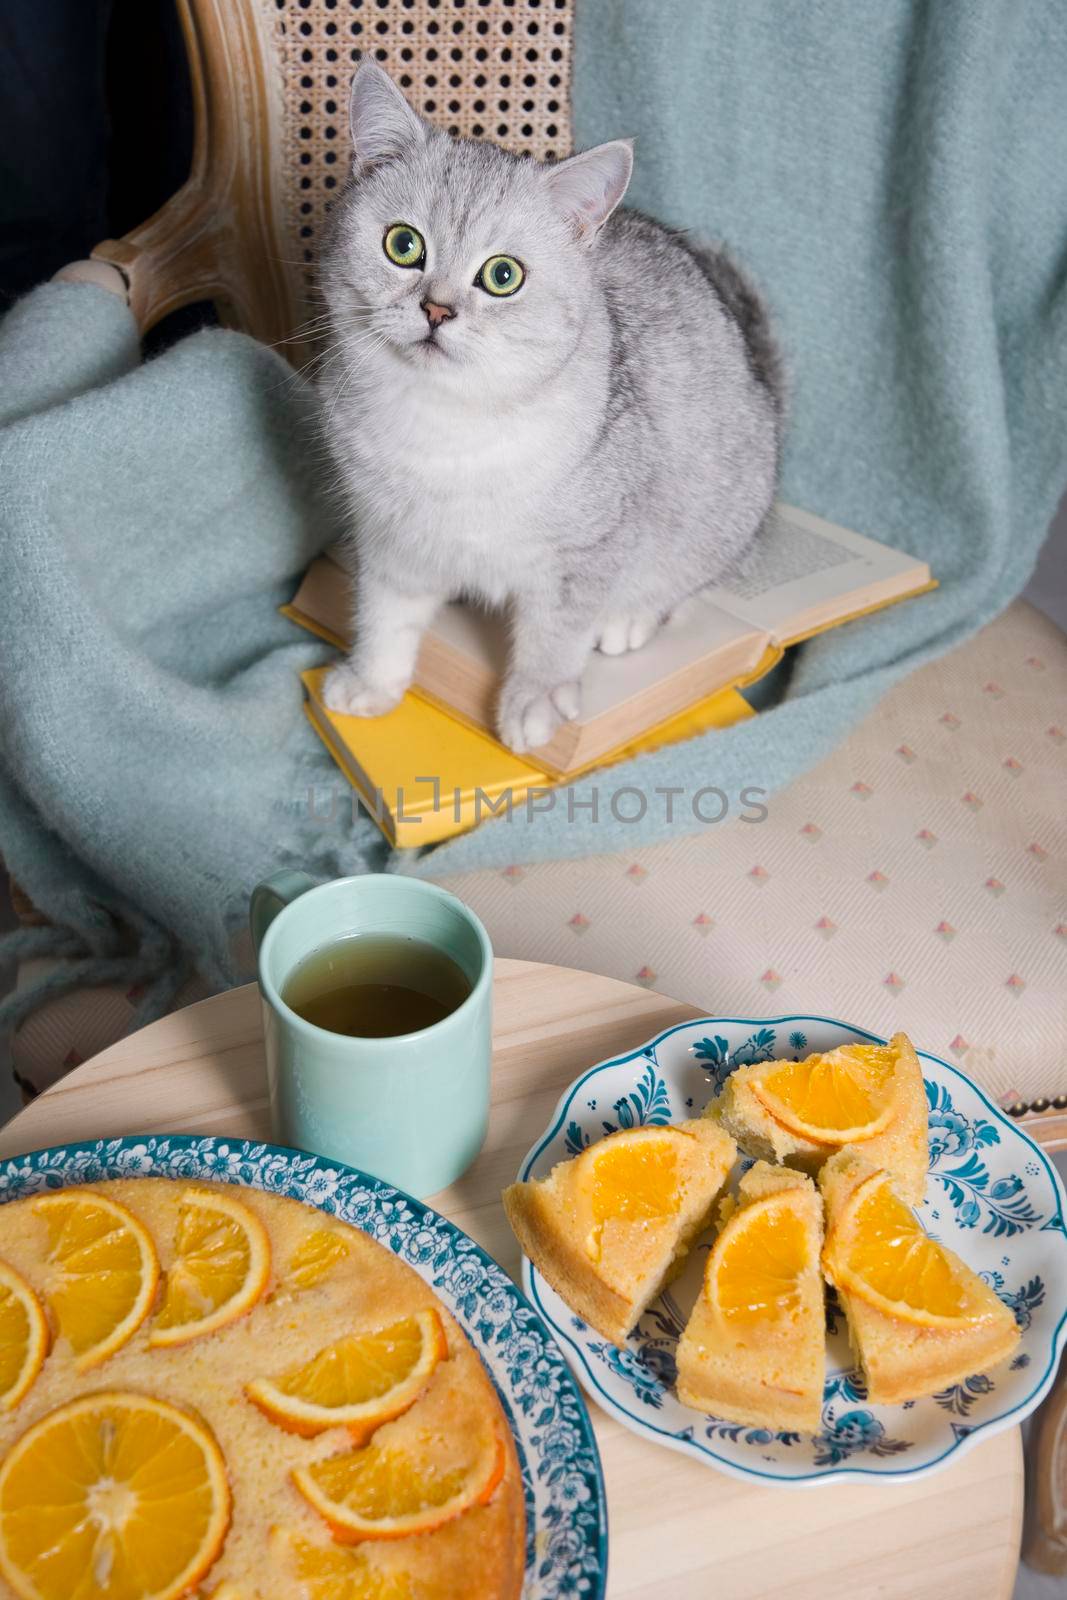 gray kitten sits in an armchair with a warm blanket and books and sniffs a warm blanket,a orange pie, cozy vibes, warm home environment. High quality photo